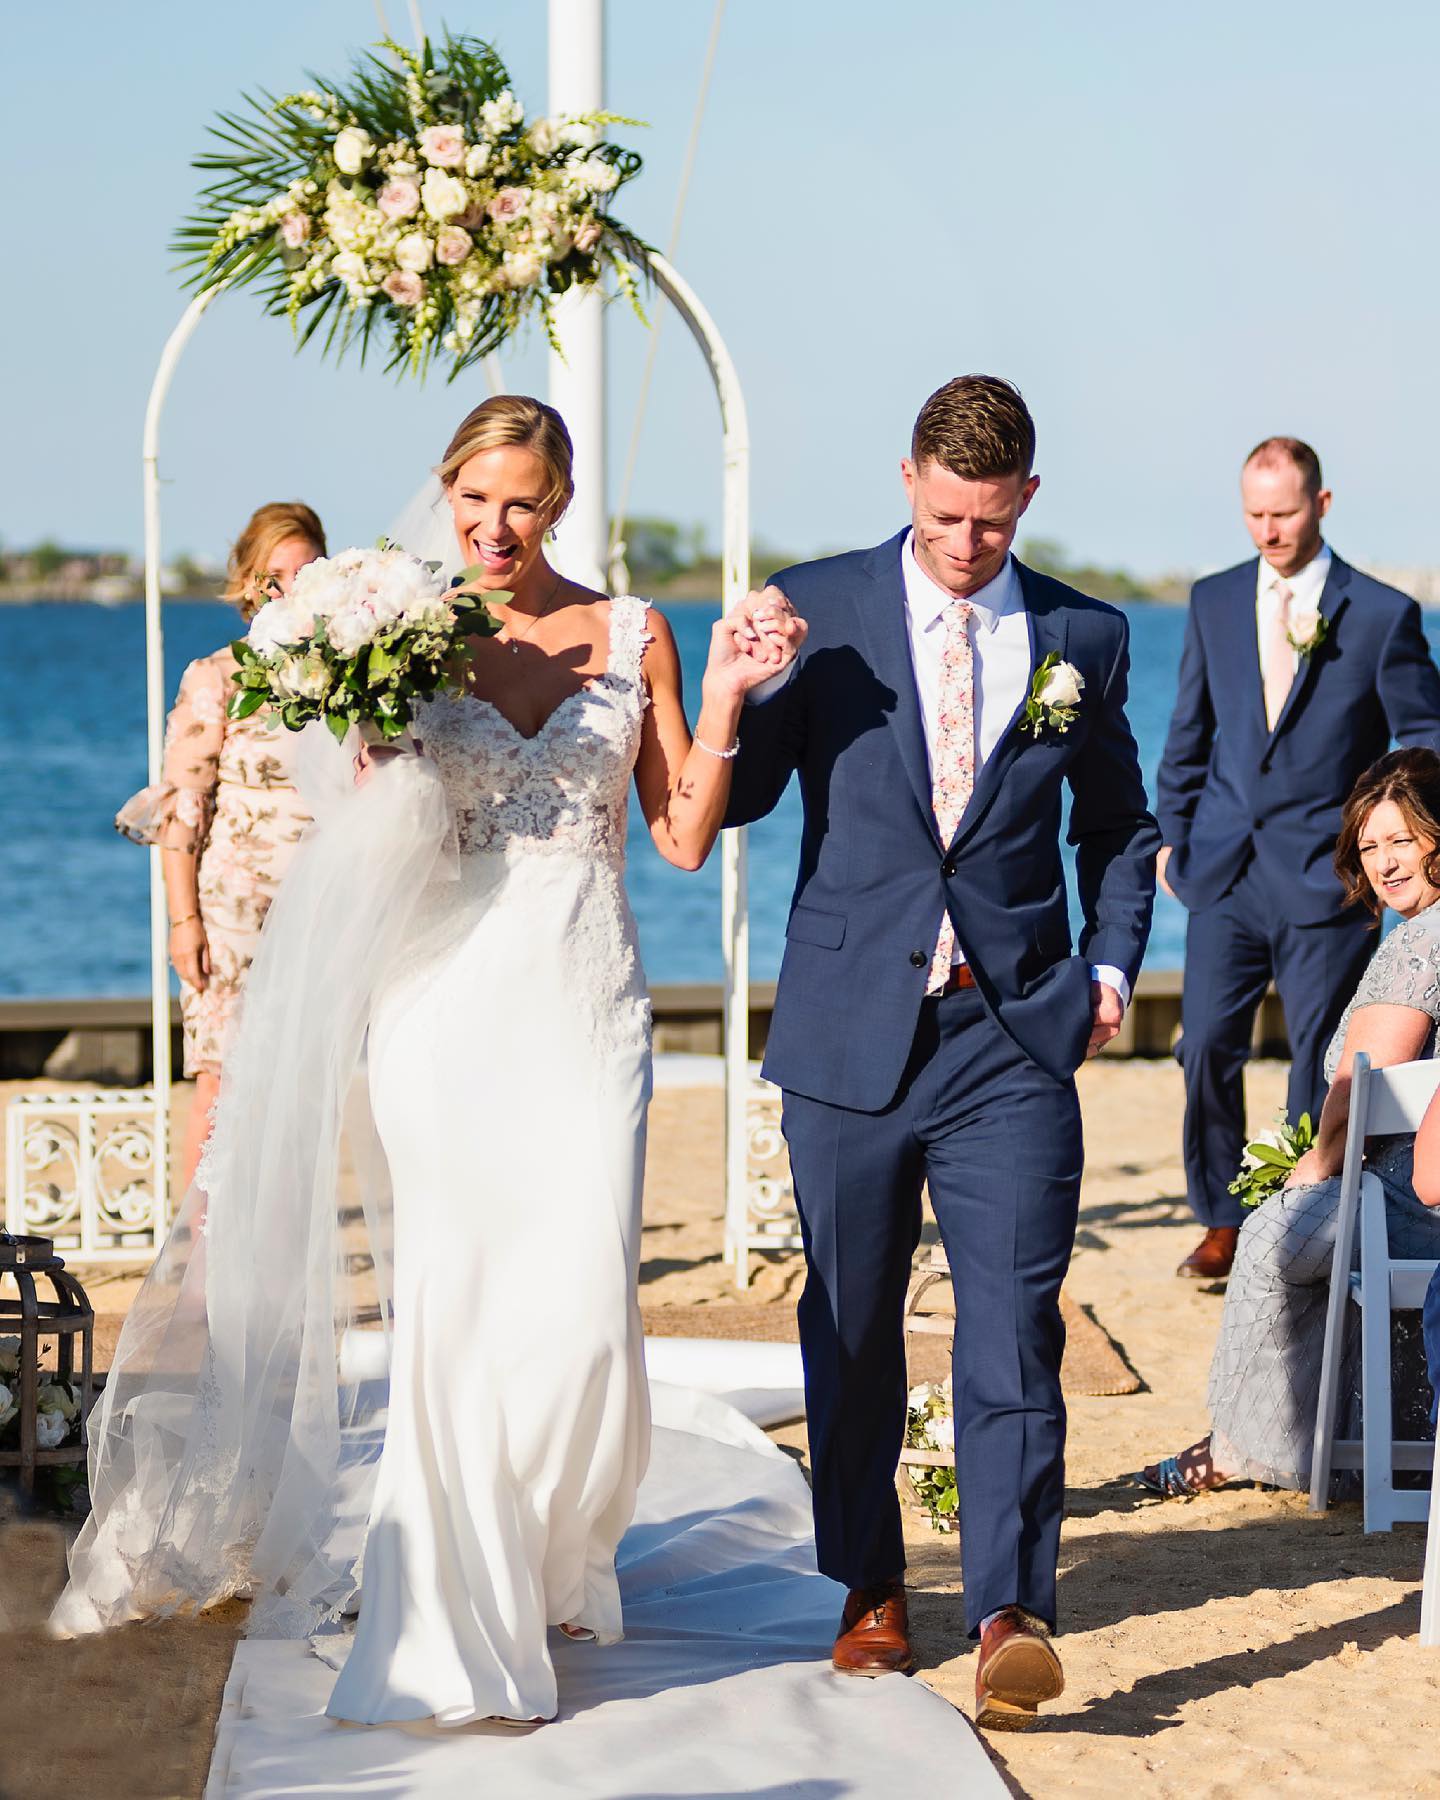 Riverhouse at Rumson Country Club wedding